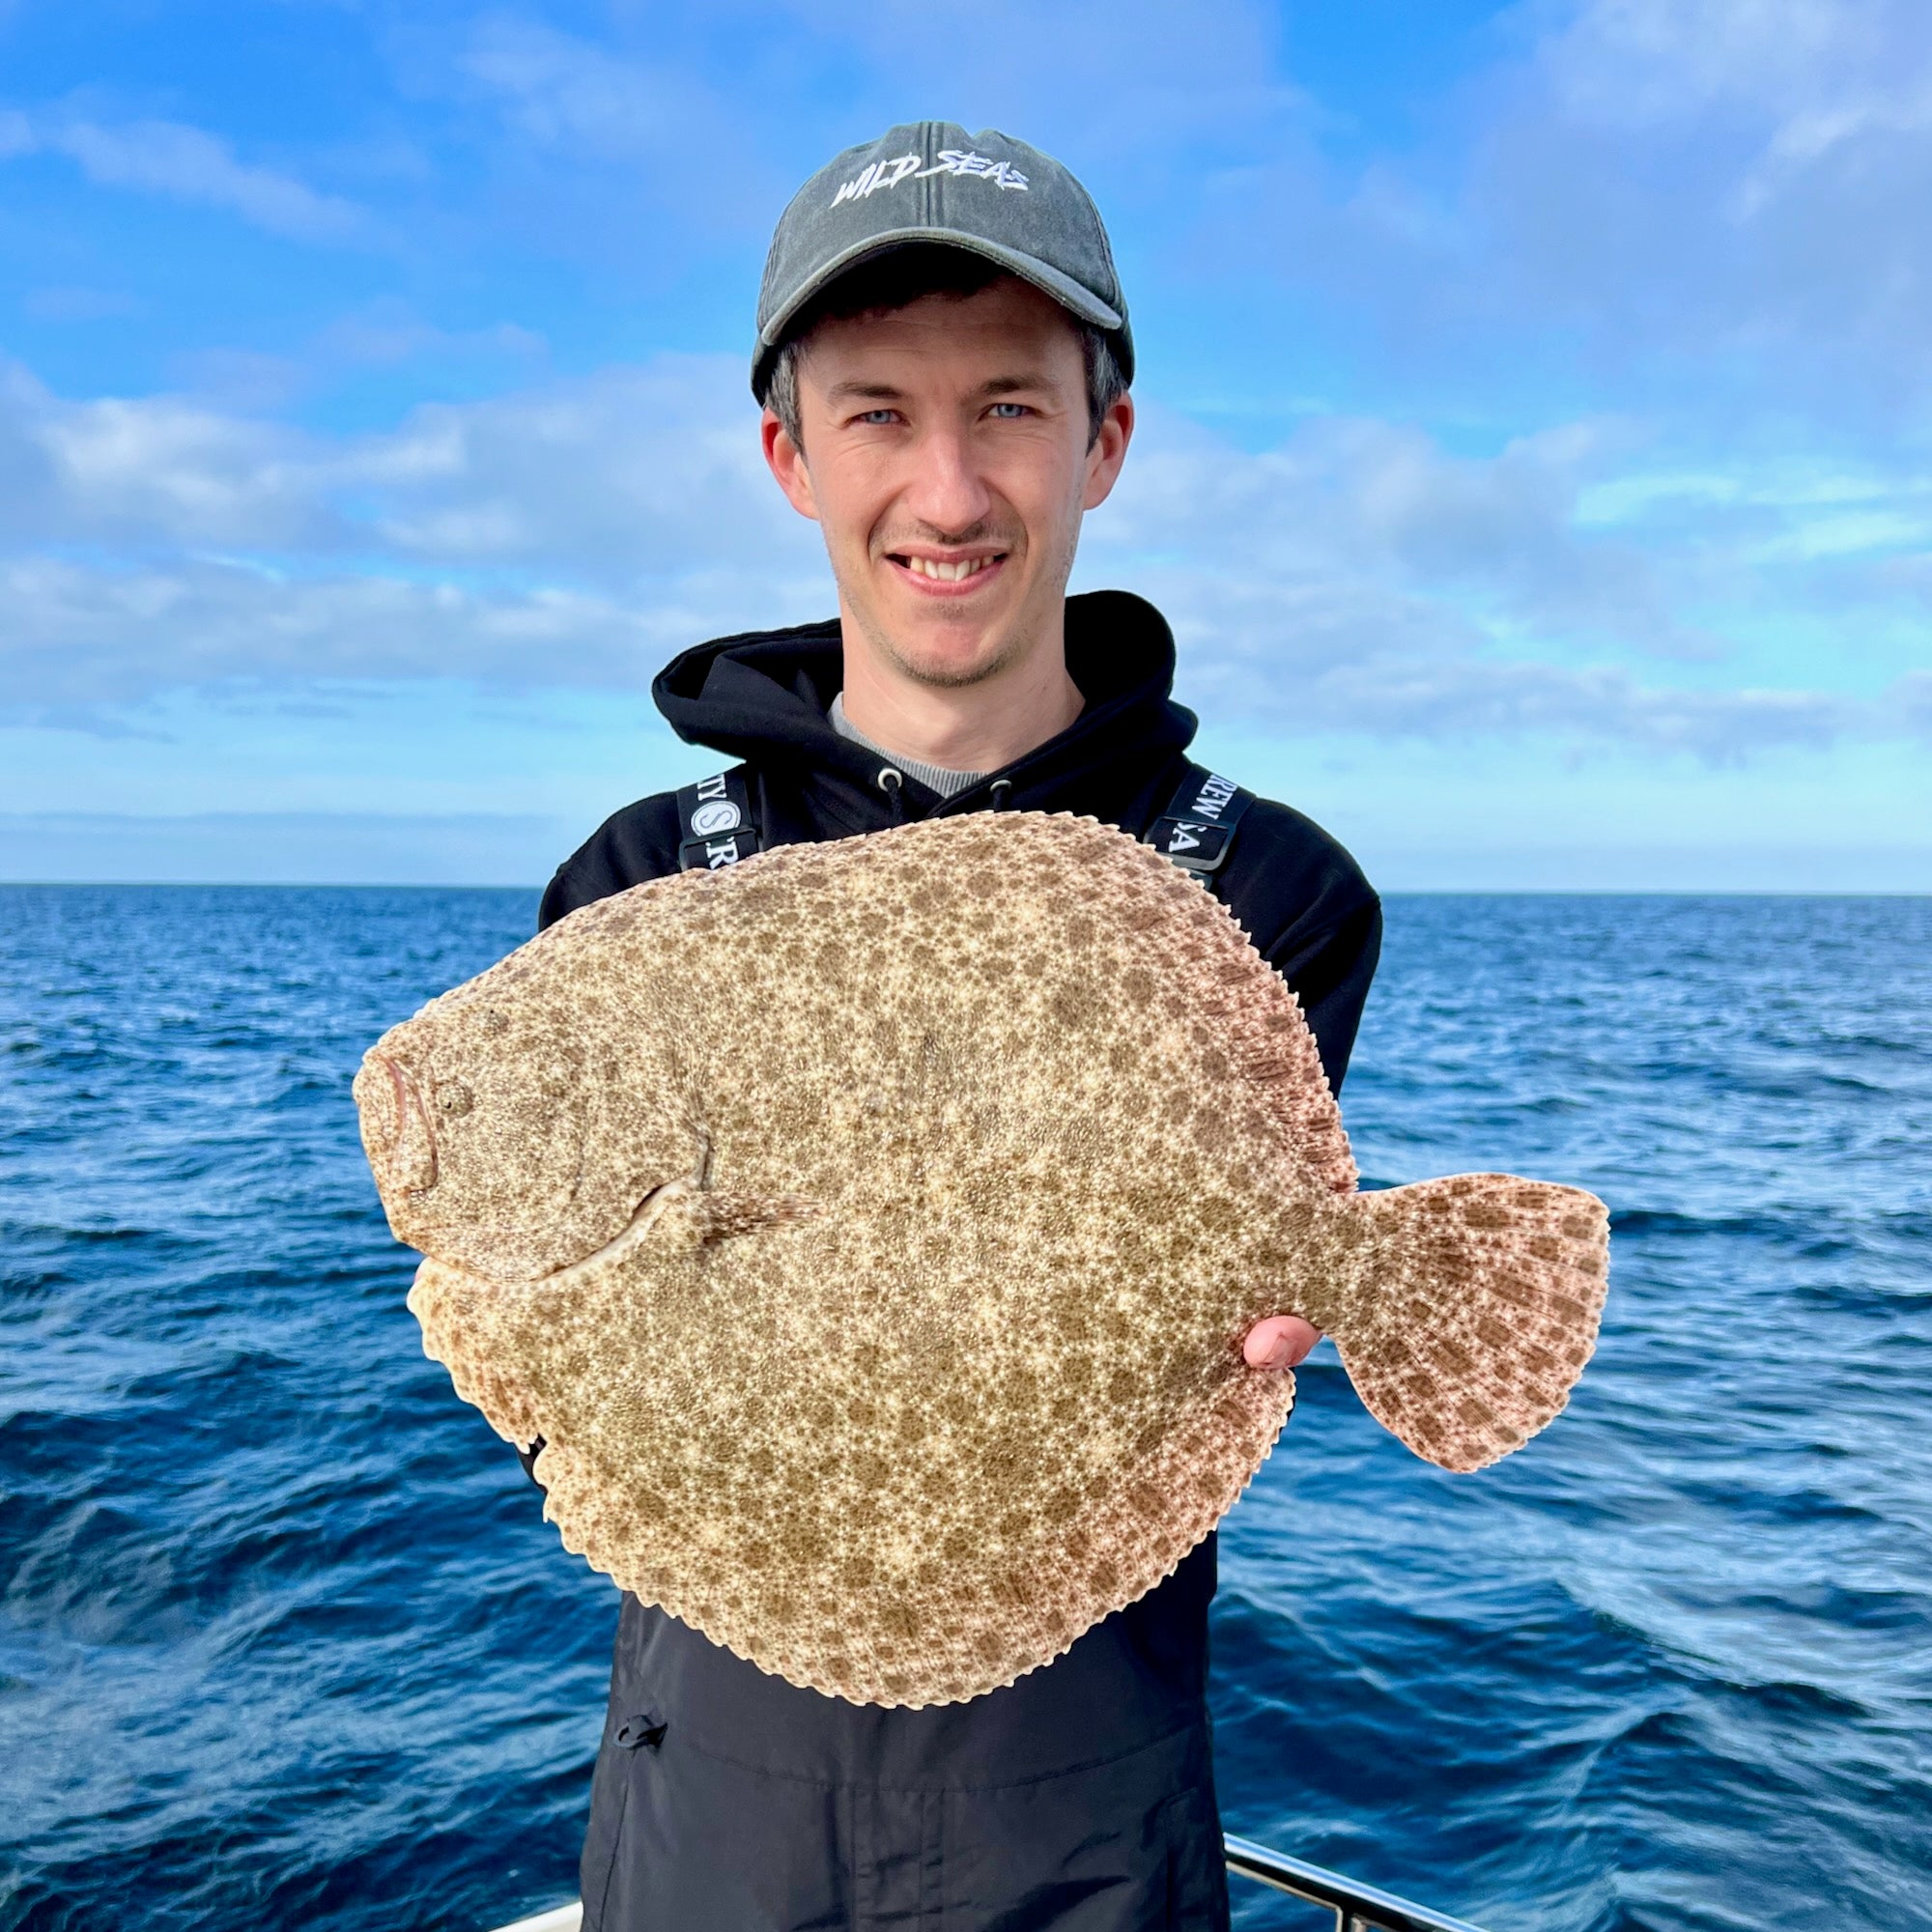 Liam with a Turbot caught boat fishing in Cornwall